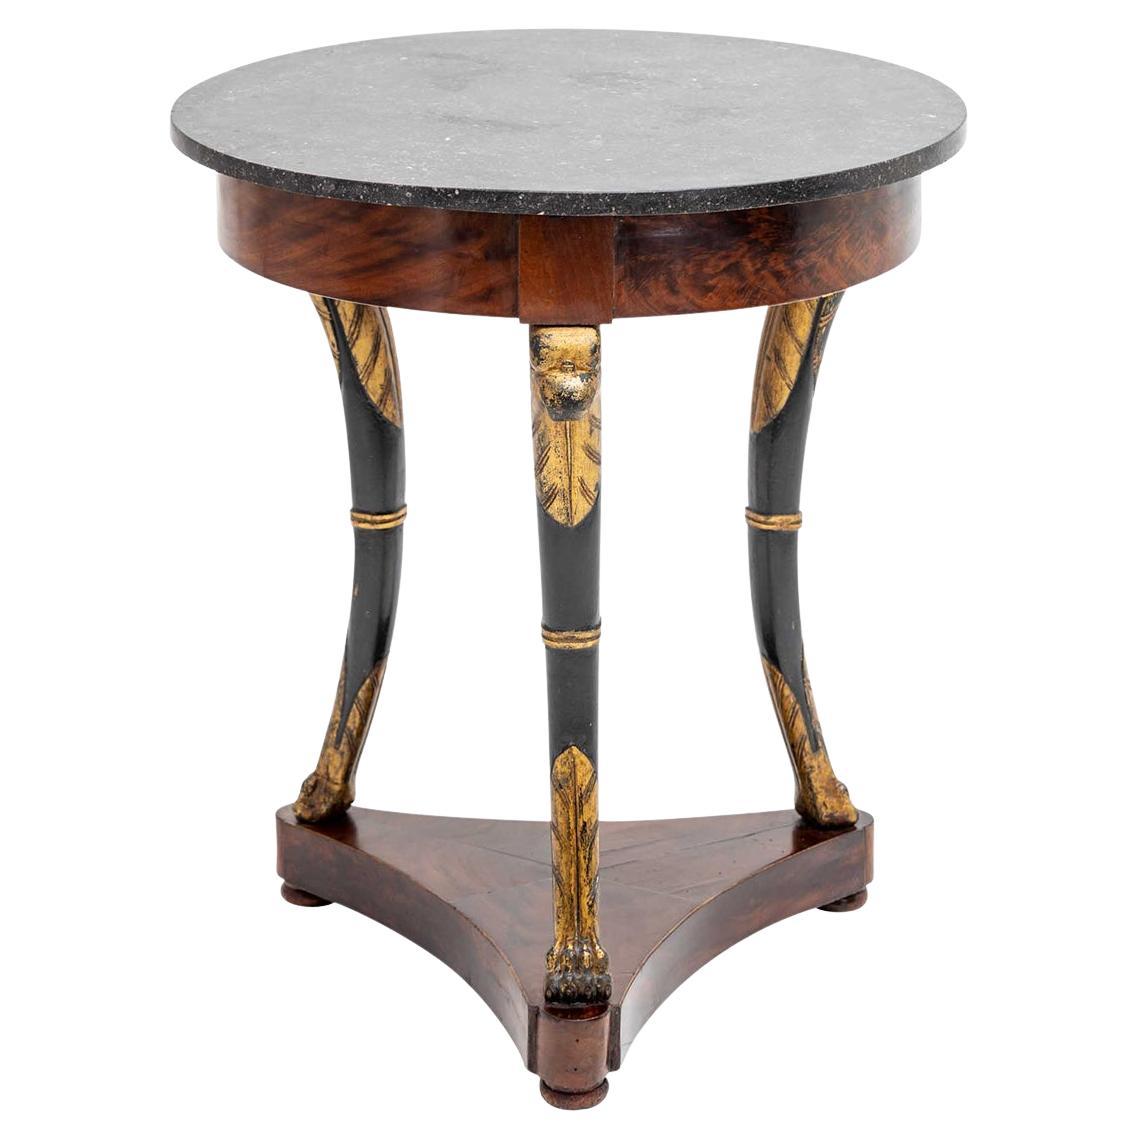 19th Century French Empire Round Mahogany Side Table - Antique Marble Table For Sale